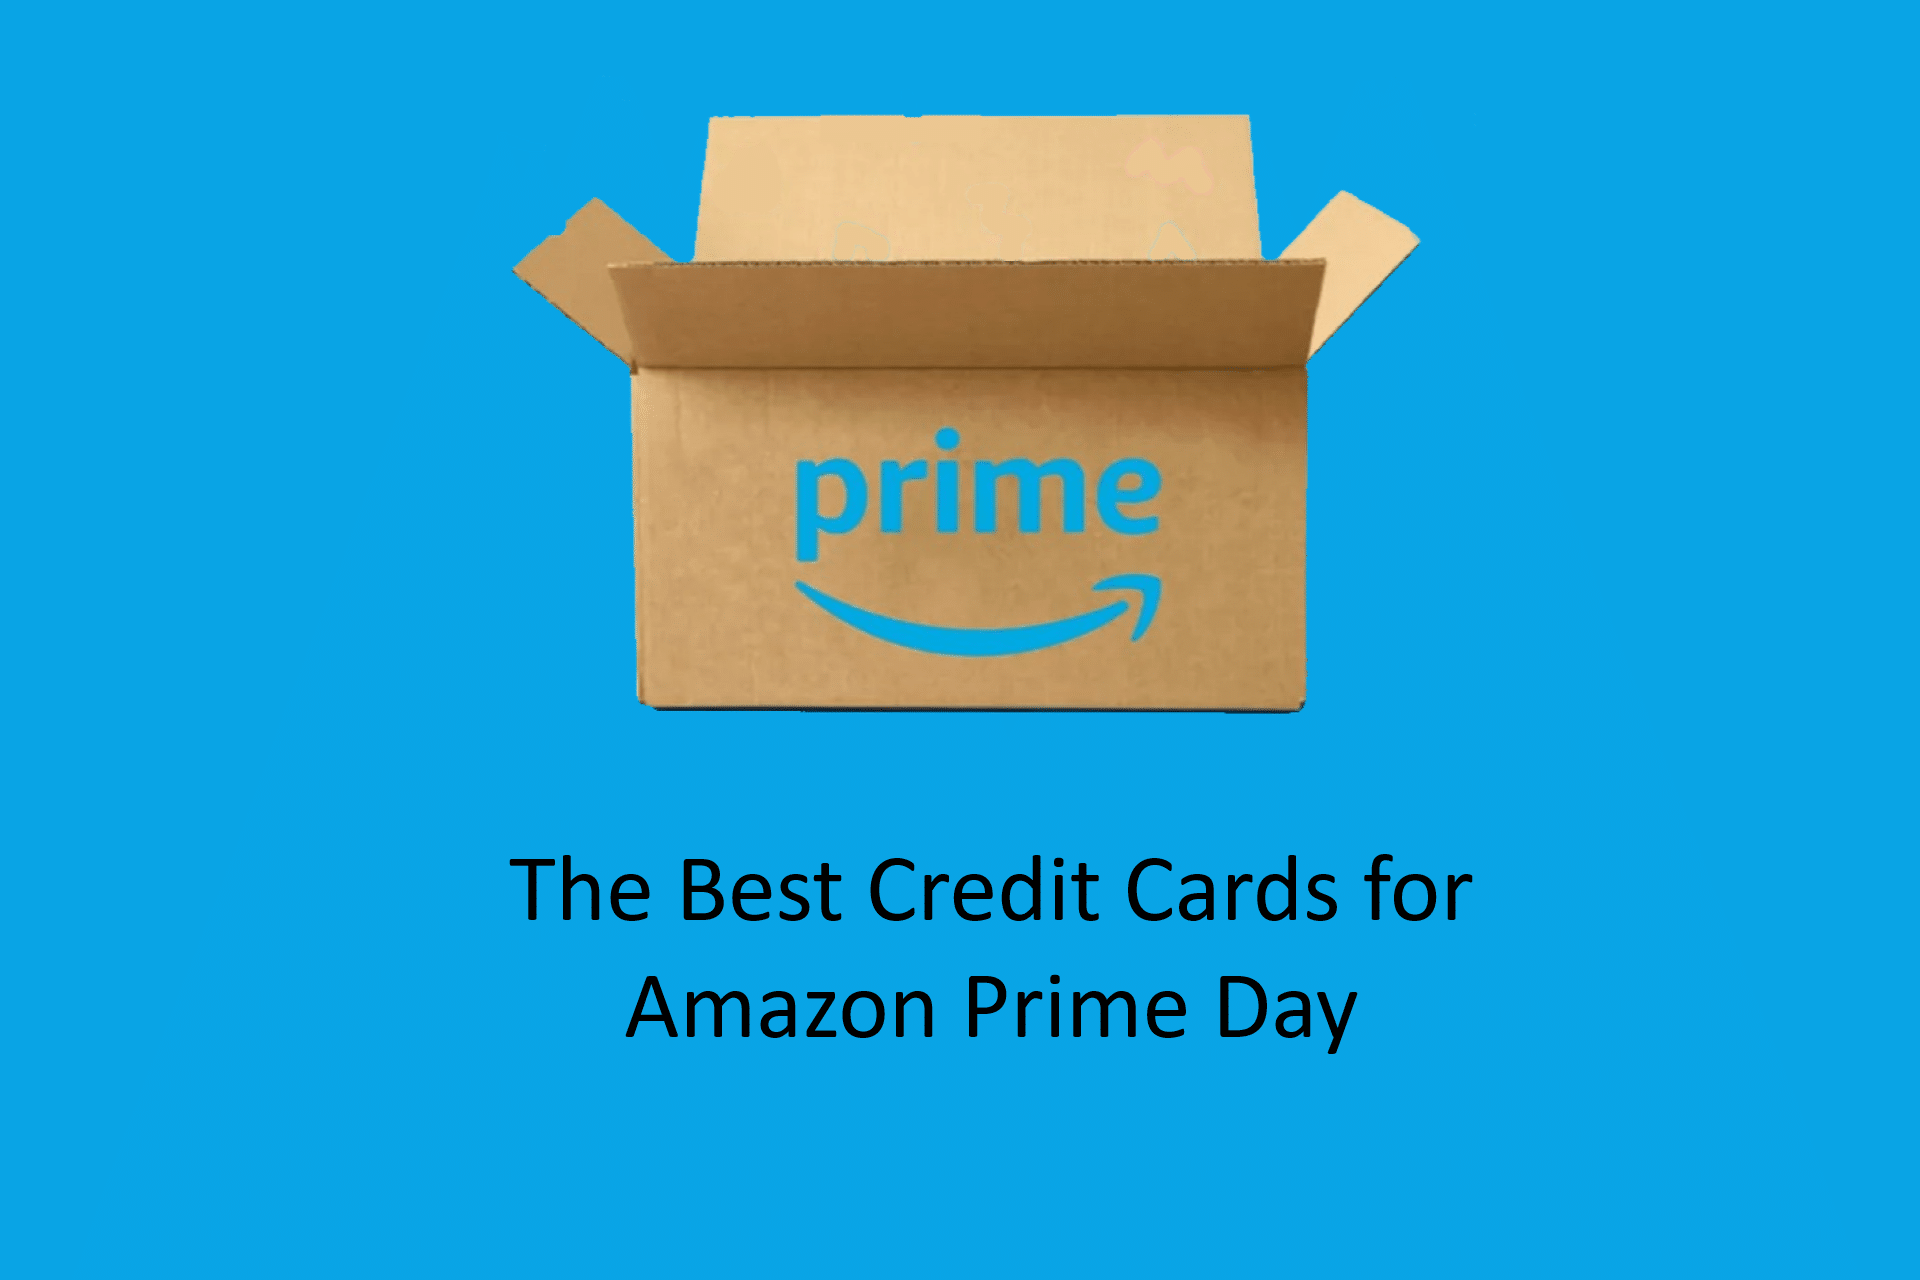 what are the best credit cards to choose for Amazon Prime Day this year?